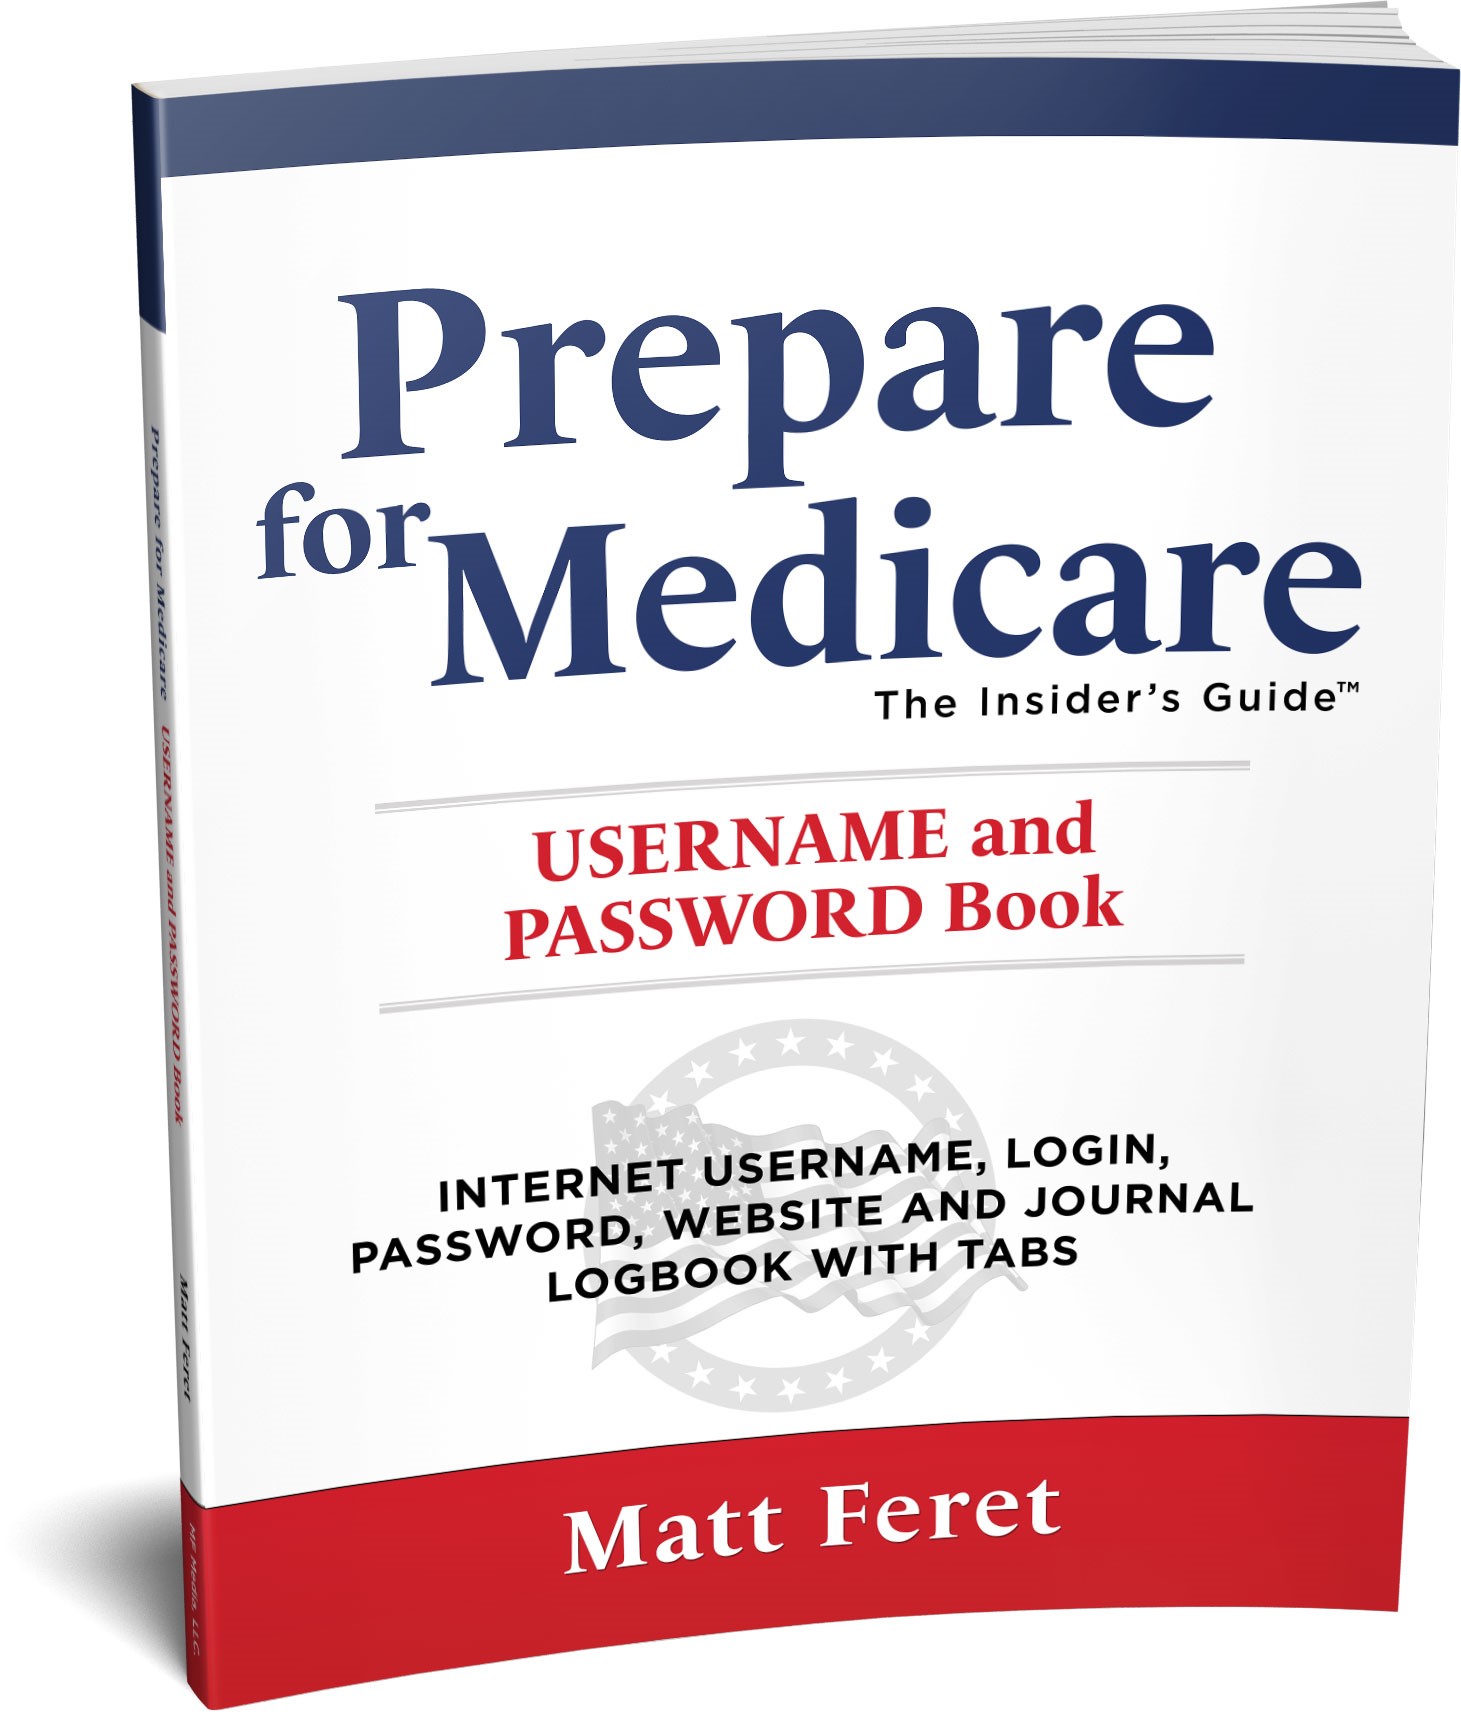 Prepare for Medicare Username and Password Book